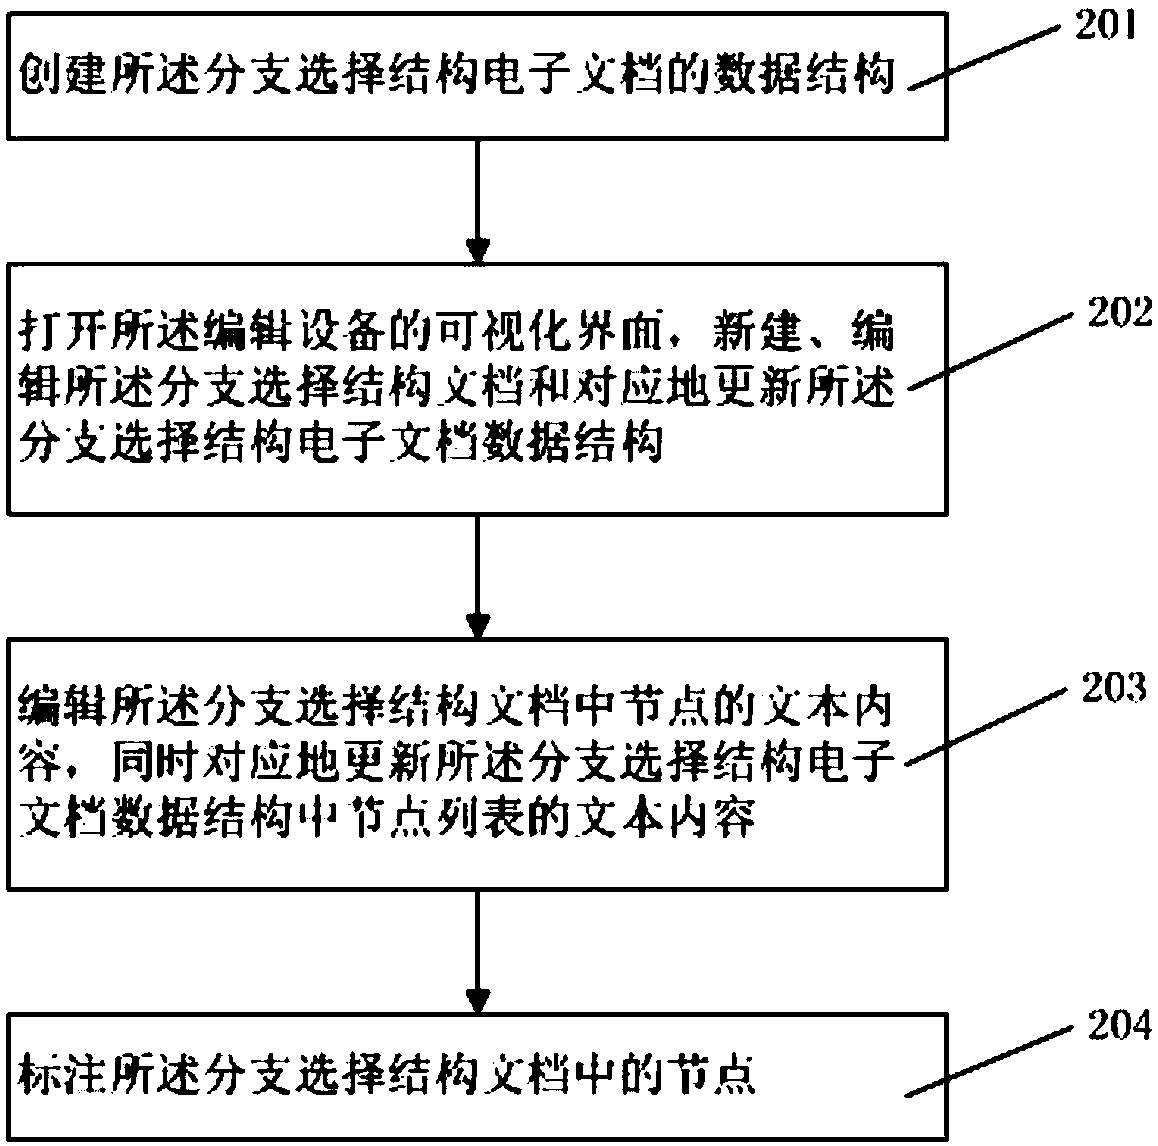 A system and method for realizing branch selection structure electronic document editing